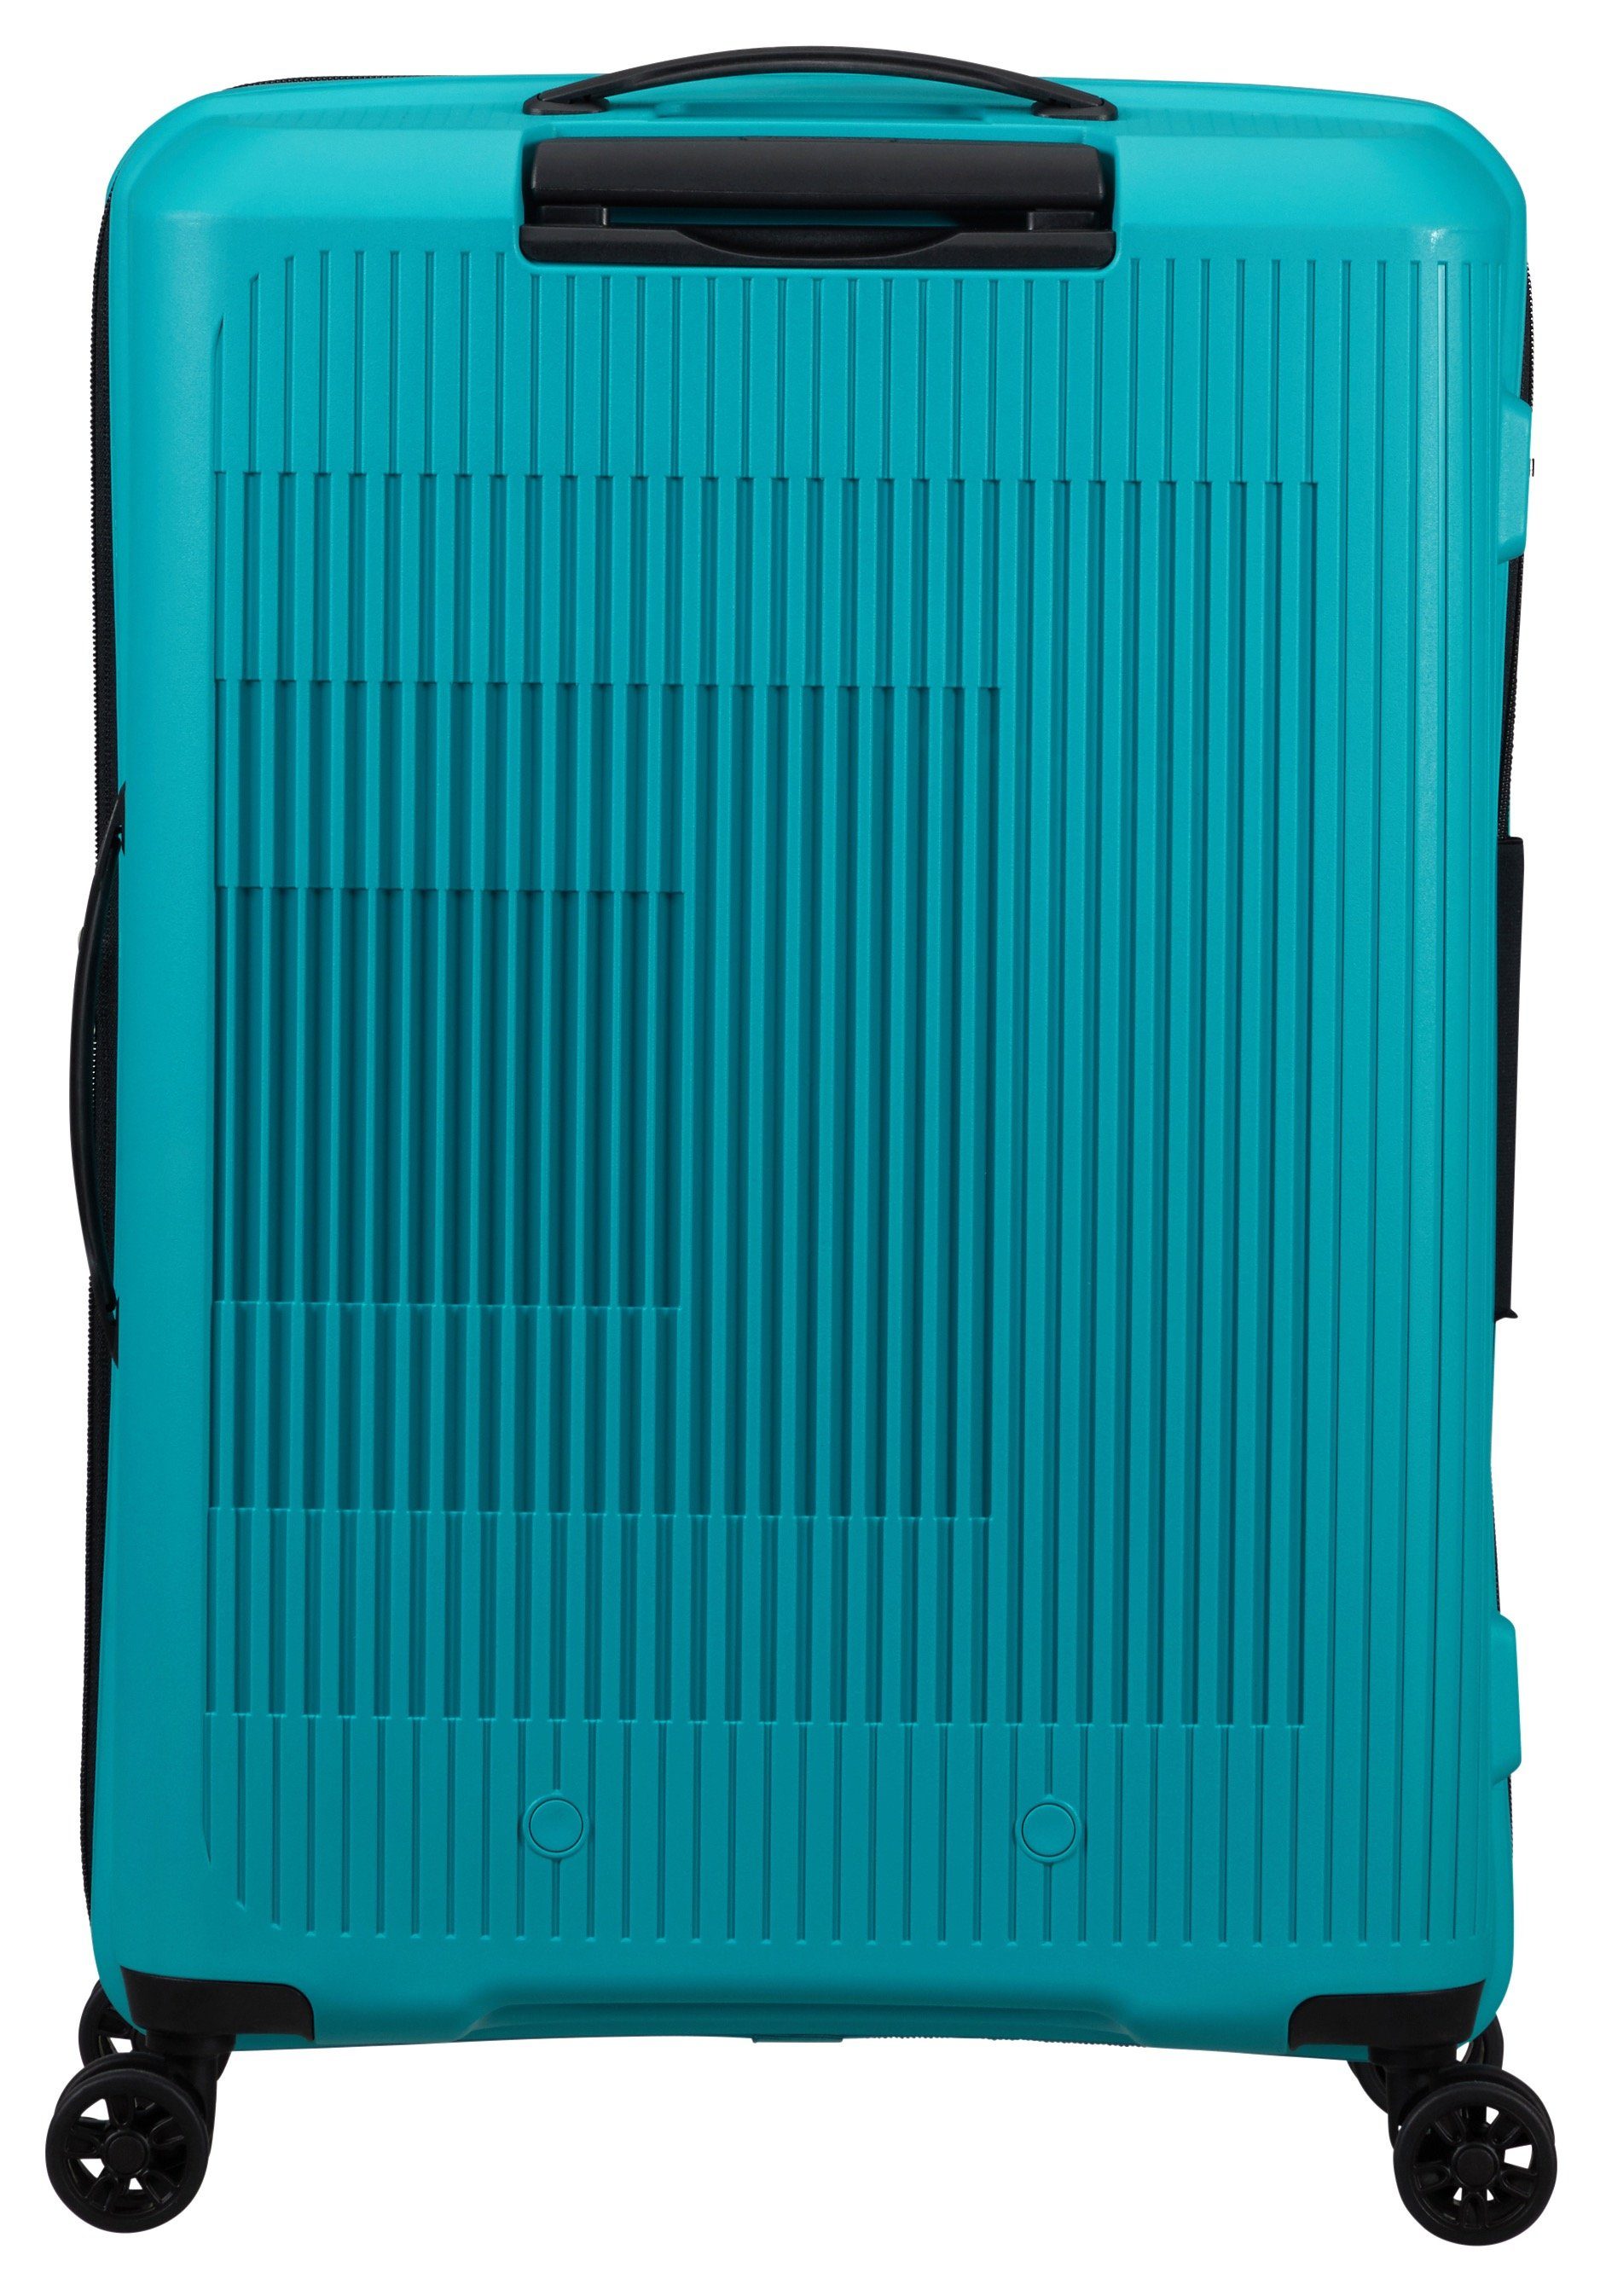 AEROSTEP turquoise 4 Tourister® exp, tonic American Koffer Spinner Rollen 67